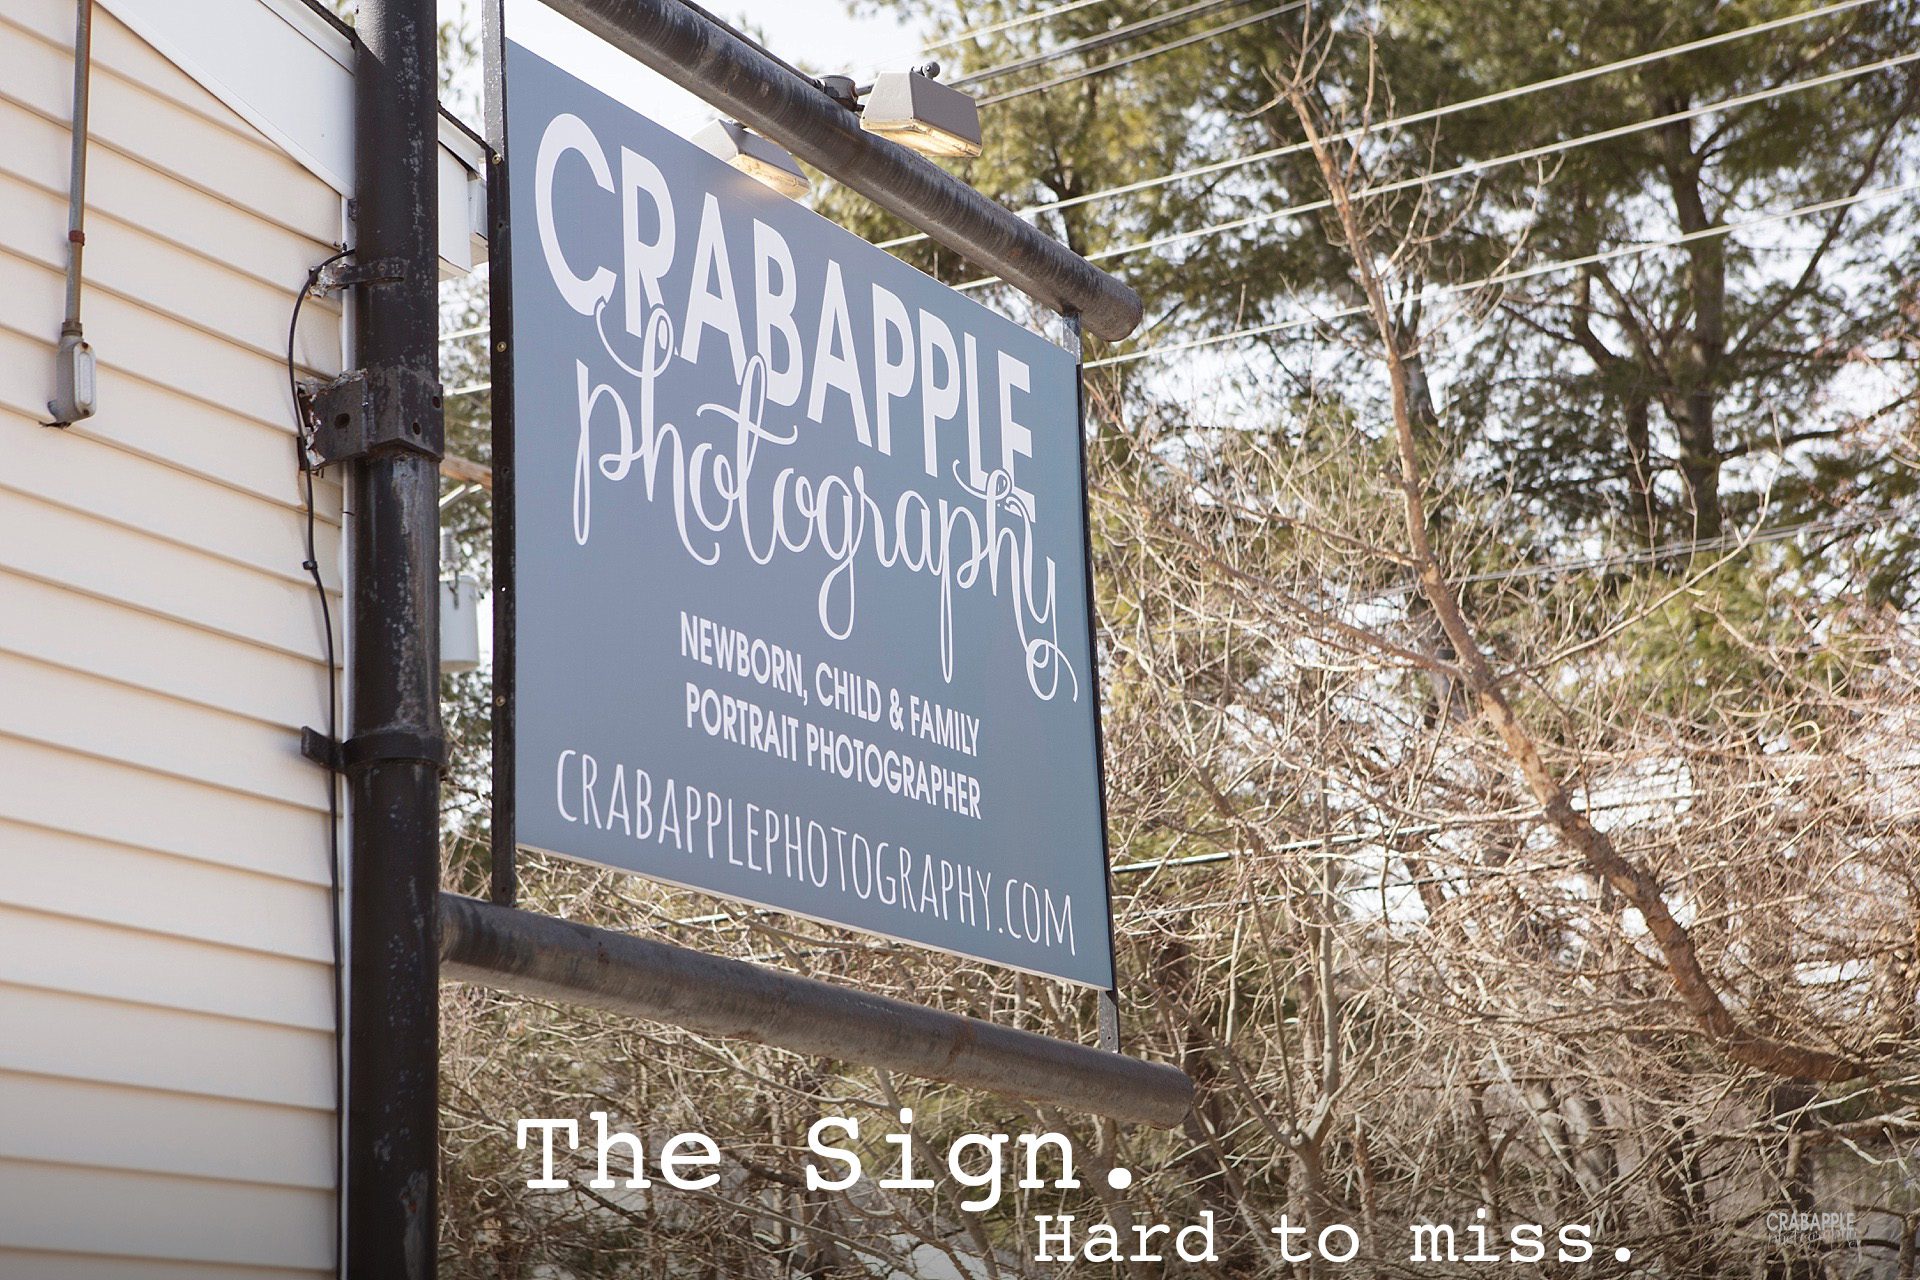 Crabapple Photography sign, located in Andover, Massachusetts.